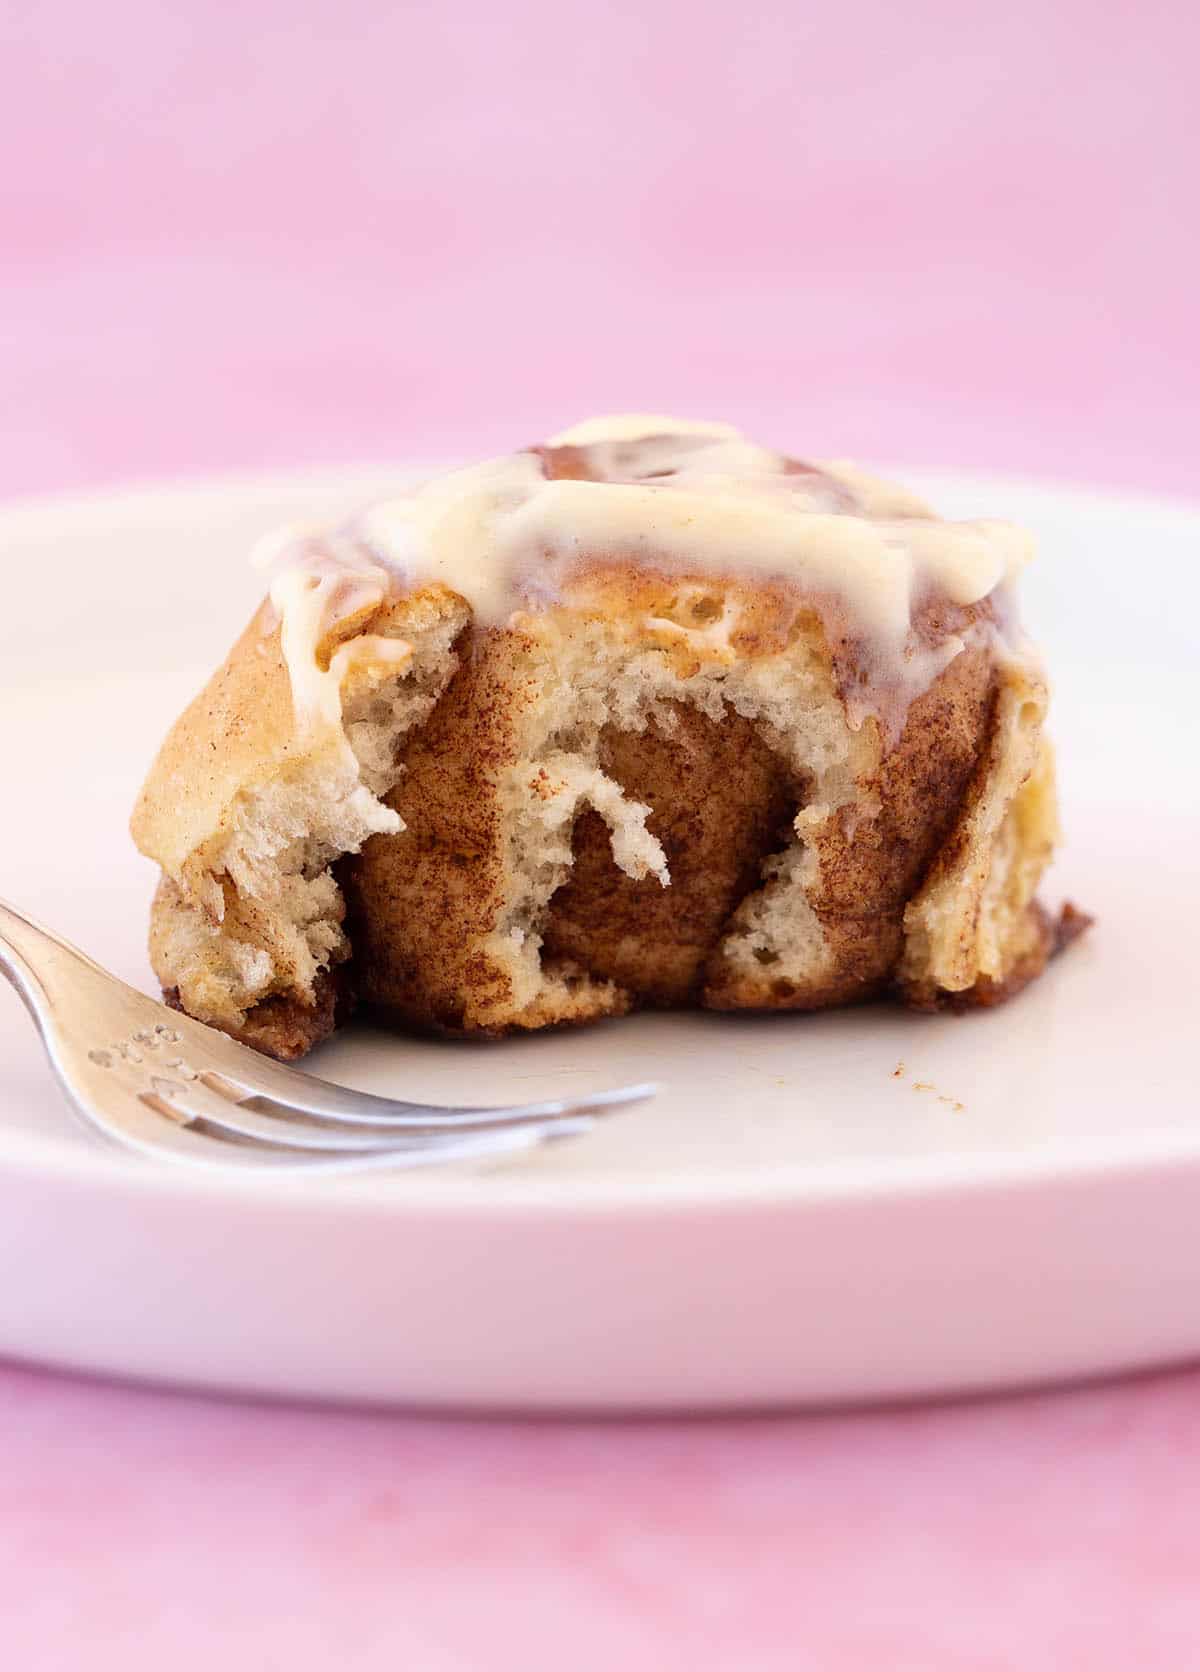 Close up of a homemade cinnamon bun with a bite taken out of it revealing the layers.